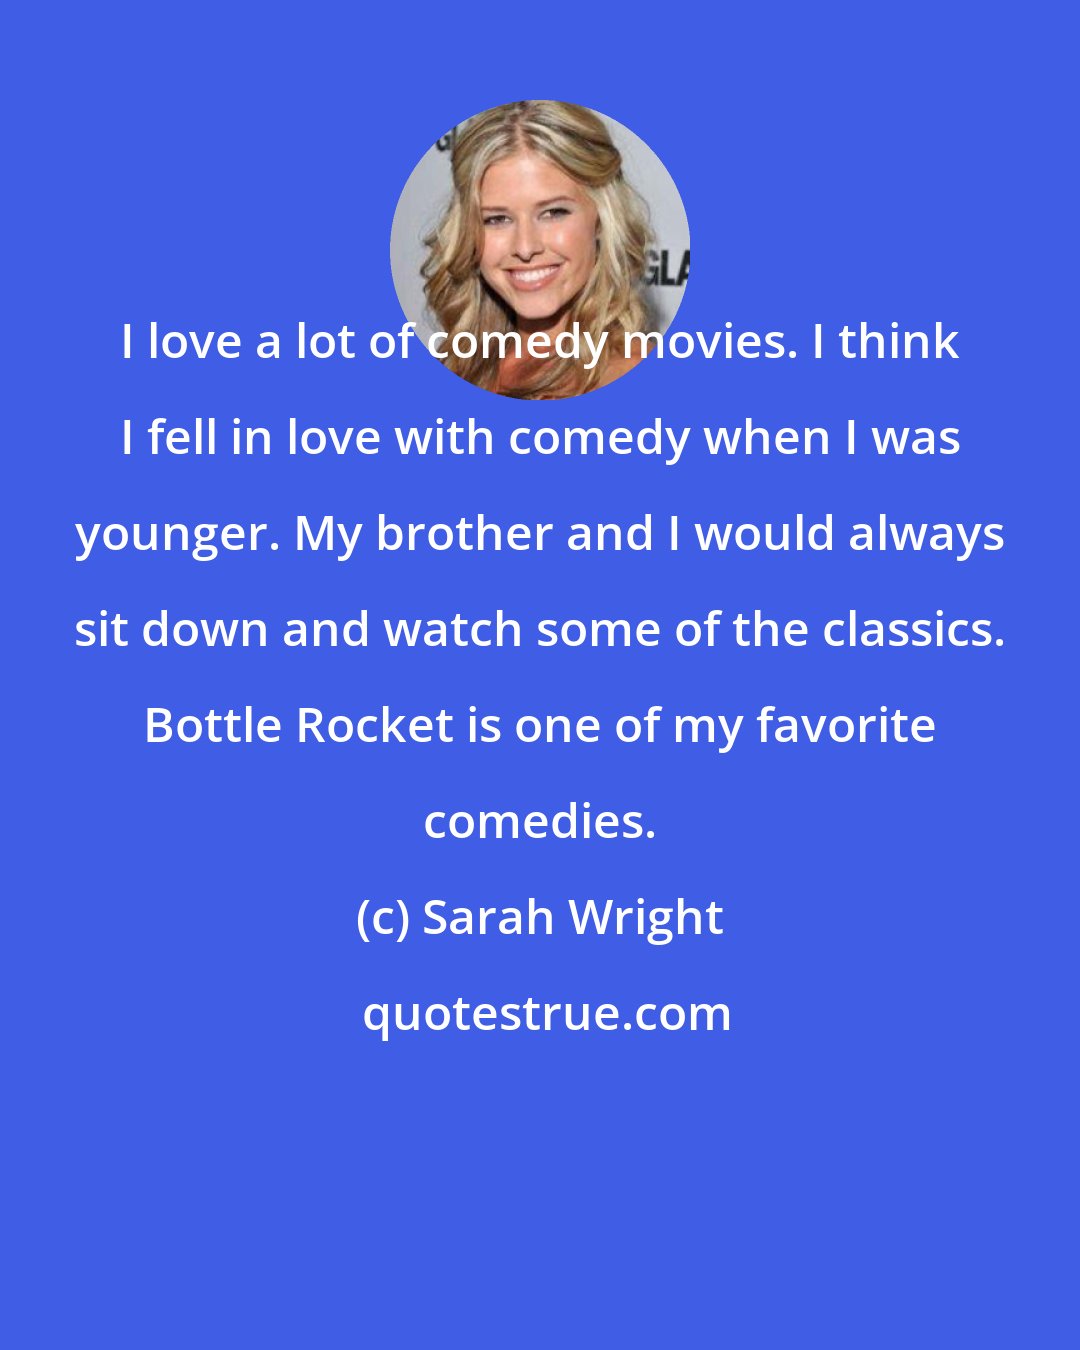 Sarah Wright: I love a lot of comedy movies. I think I fell in love with comedy when I was younger. My brother and I would always sit down and watch some of the classics. Bottle Rocket is one of my favorite comedies.